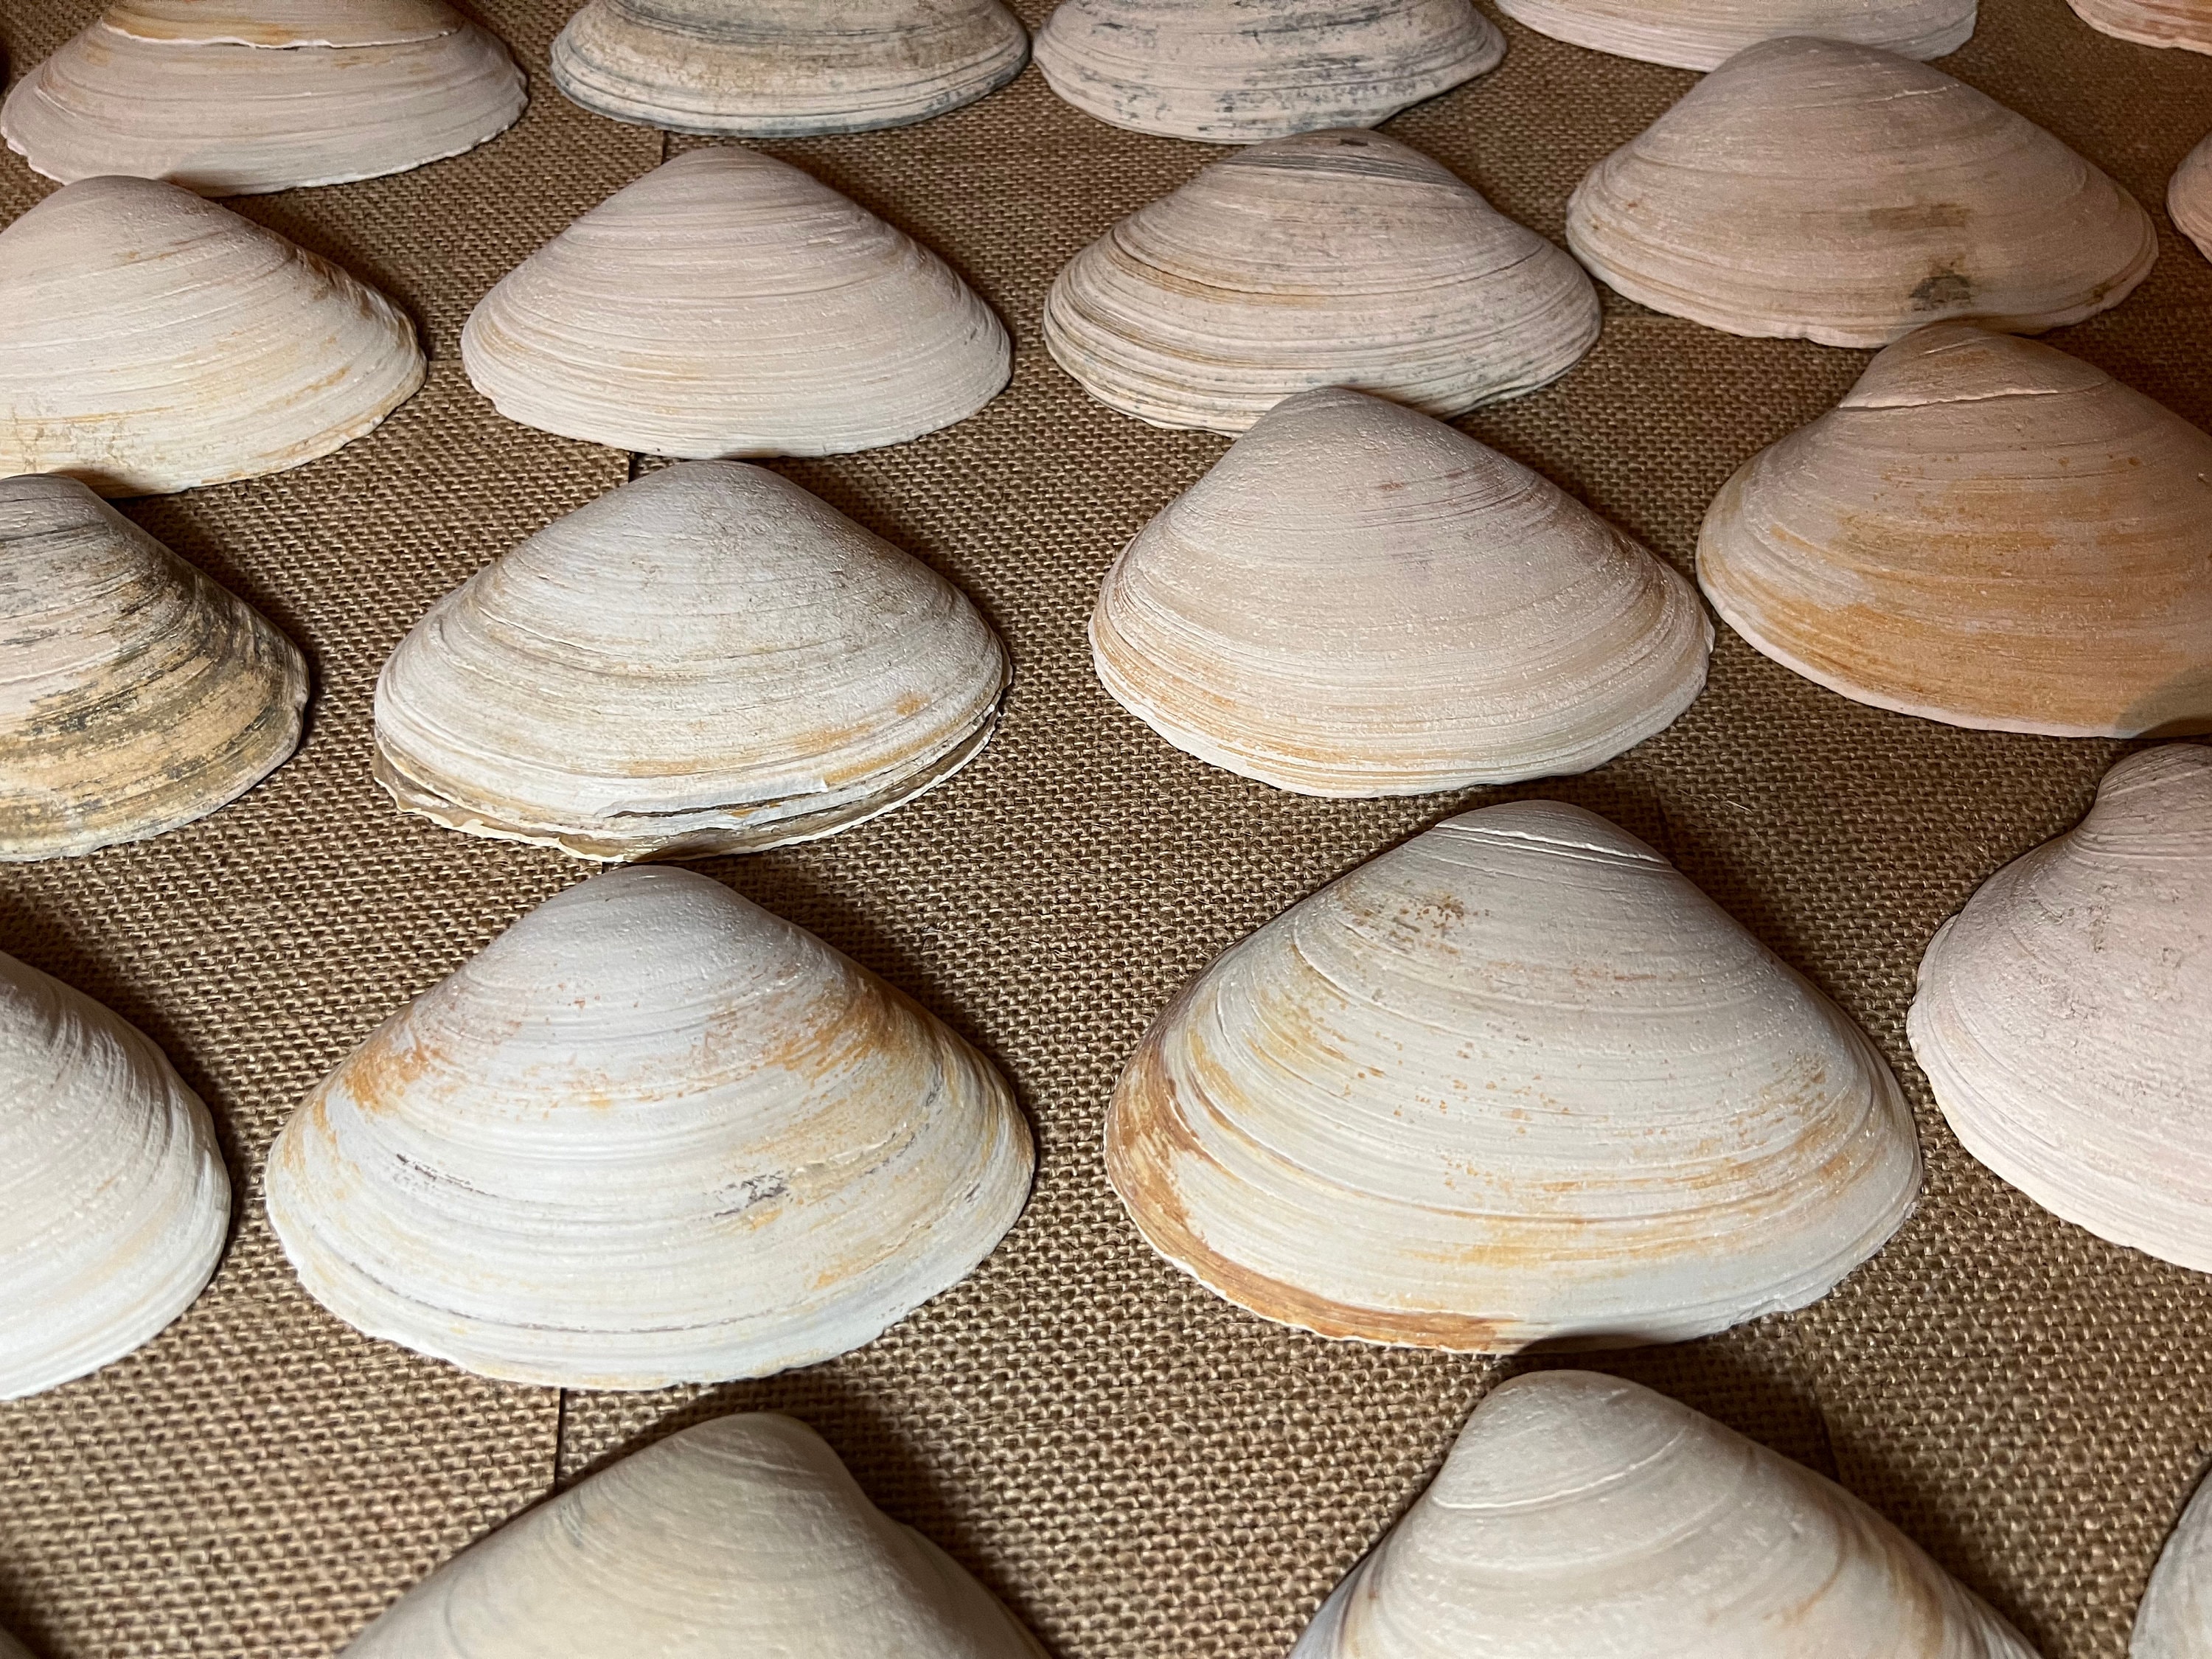 10 Large 3-4 Inch Clam Shells Long Island Decoupage Natural Seashells  Natural Shells Craft Seashells Seashells for Crafts -  Canada